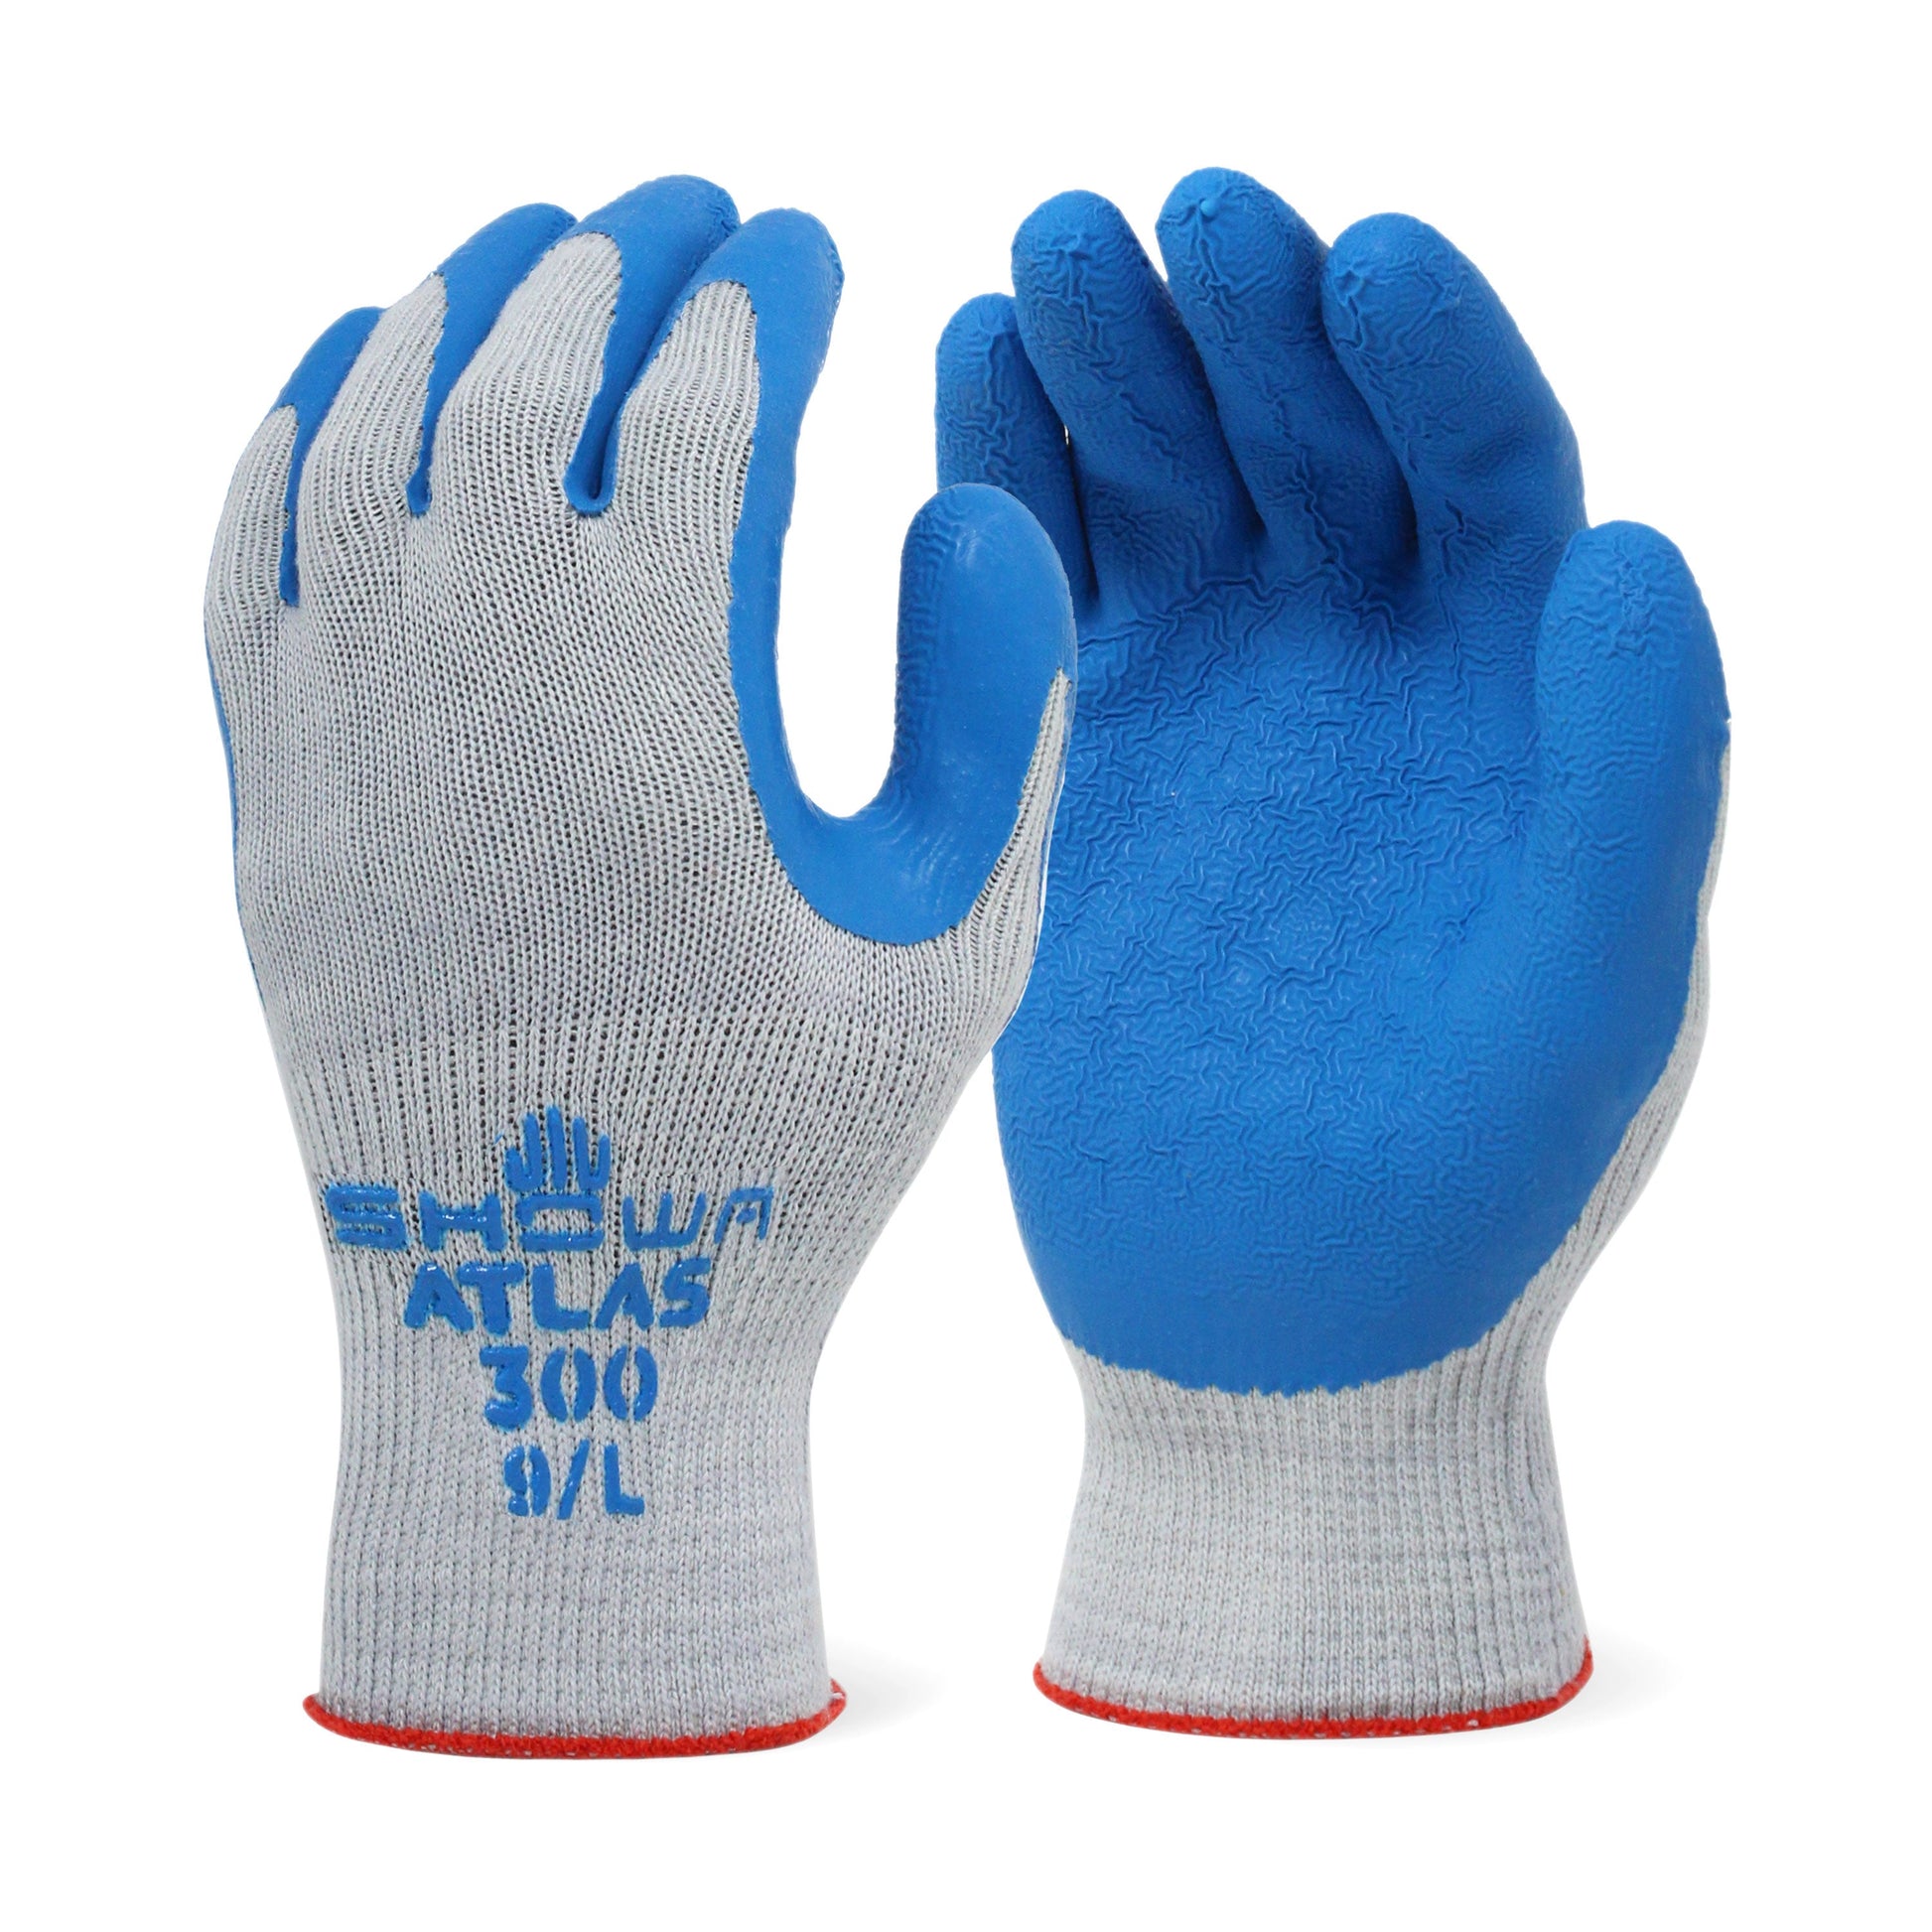 Wholesale Sublimated Green Goblin Gloves Manufacturer in USA, Australia,  Canada, Europe & UAE